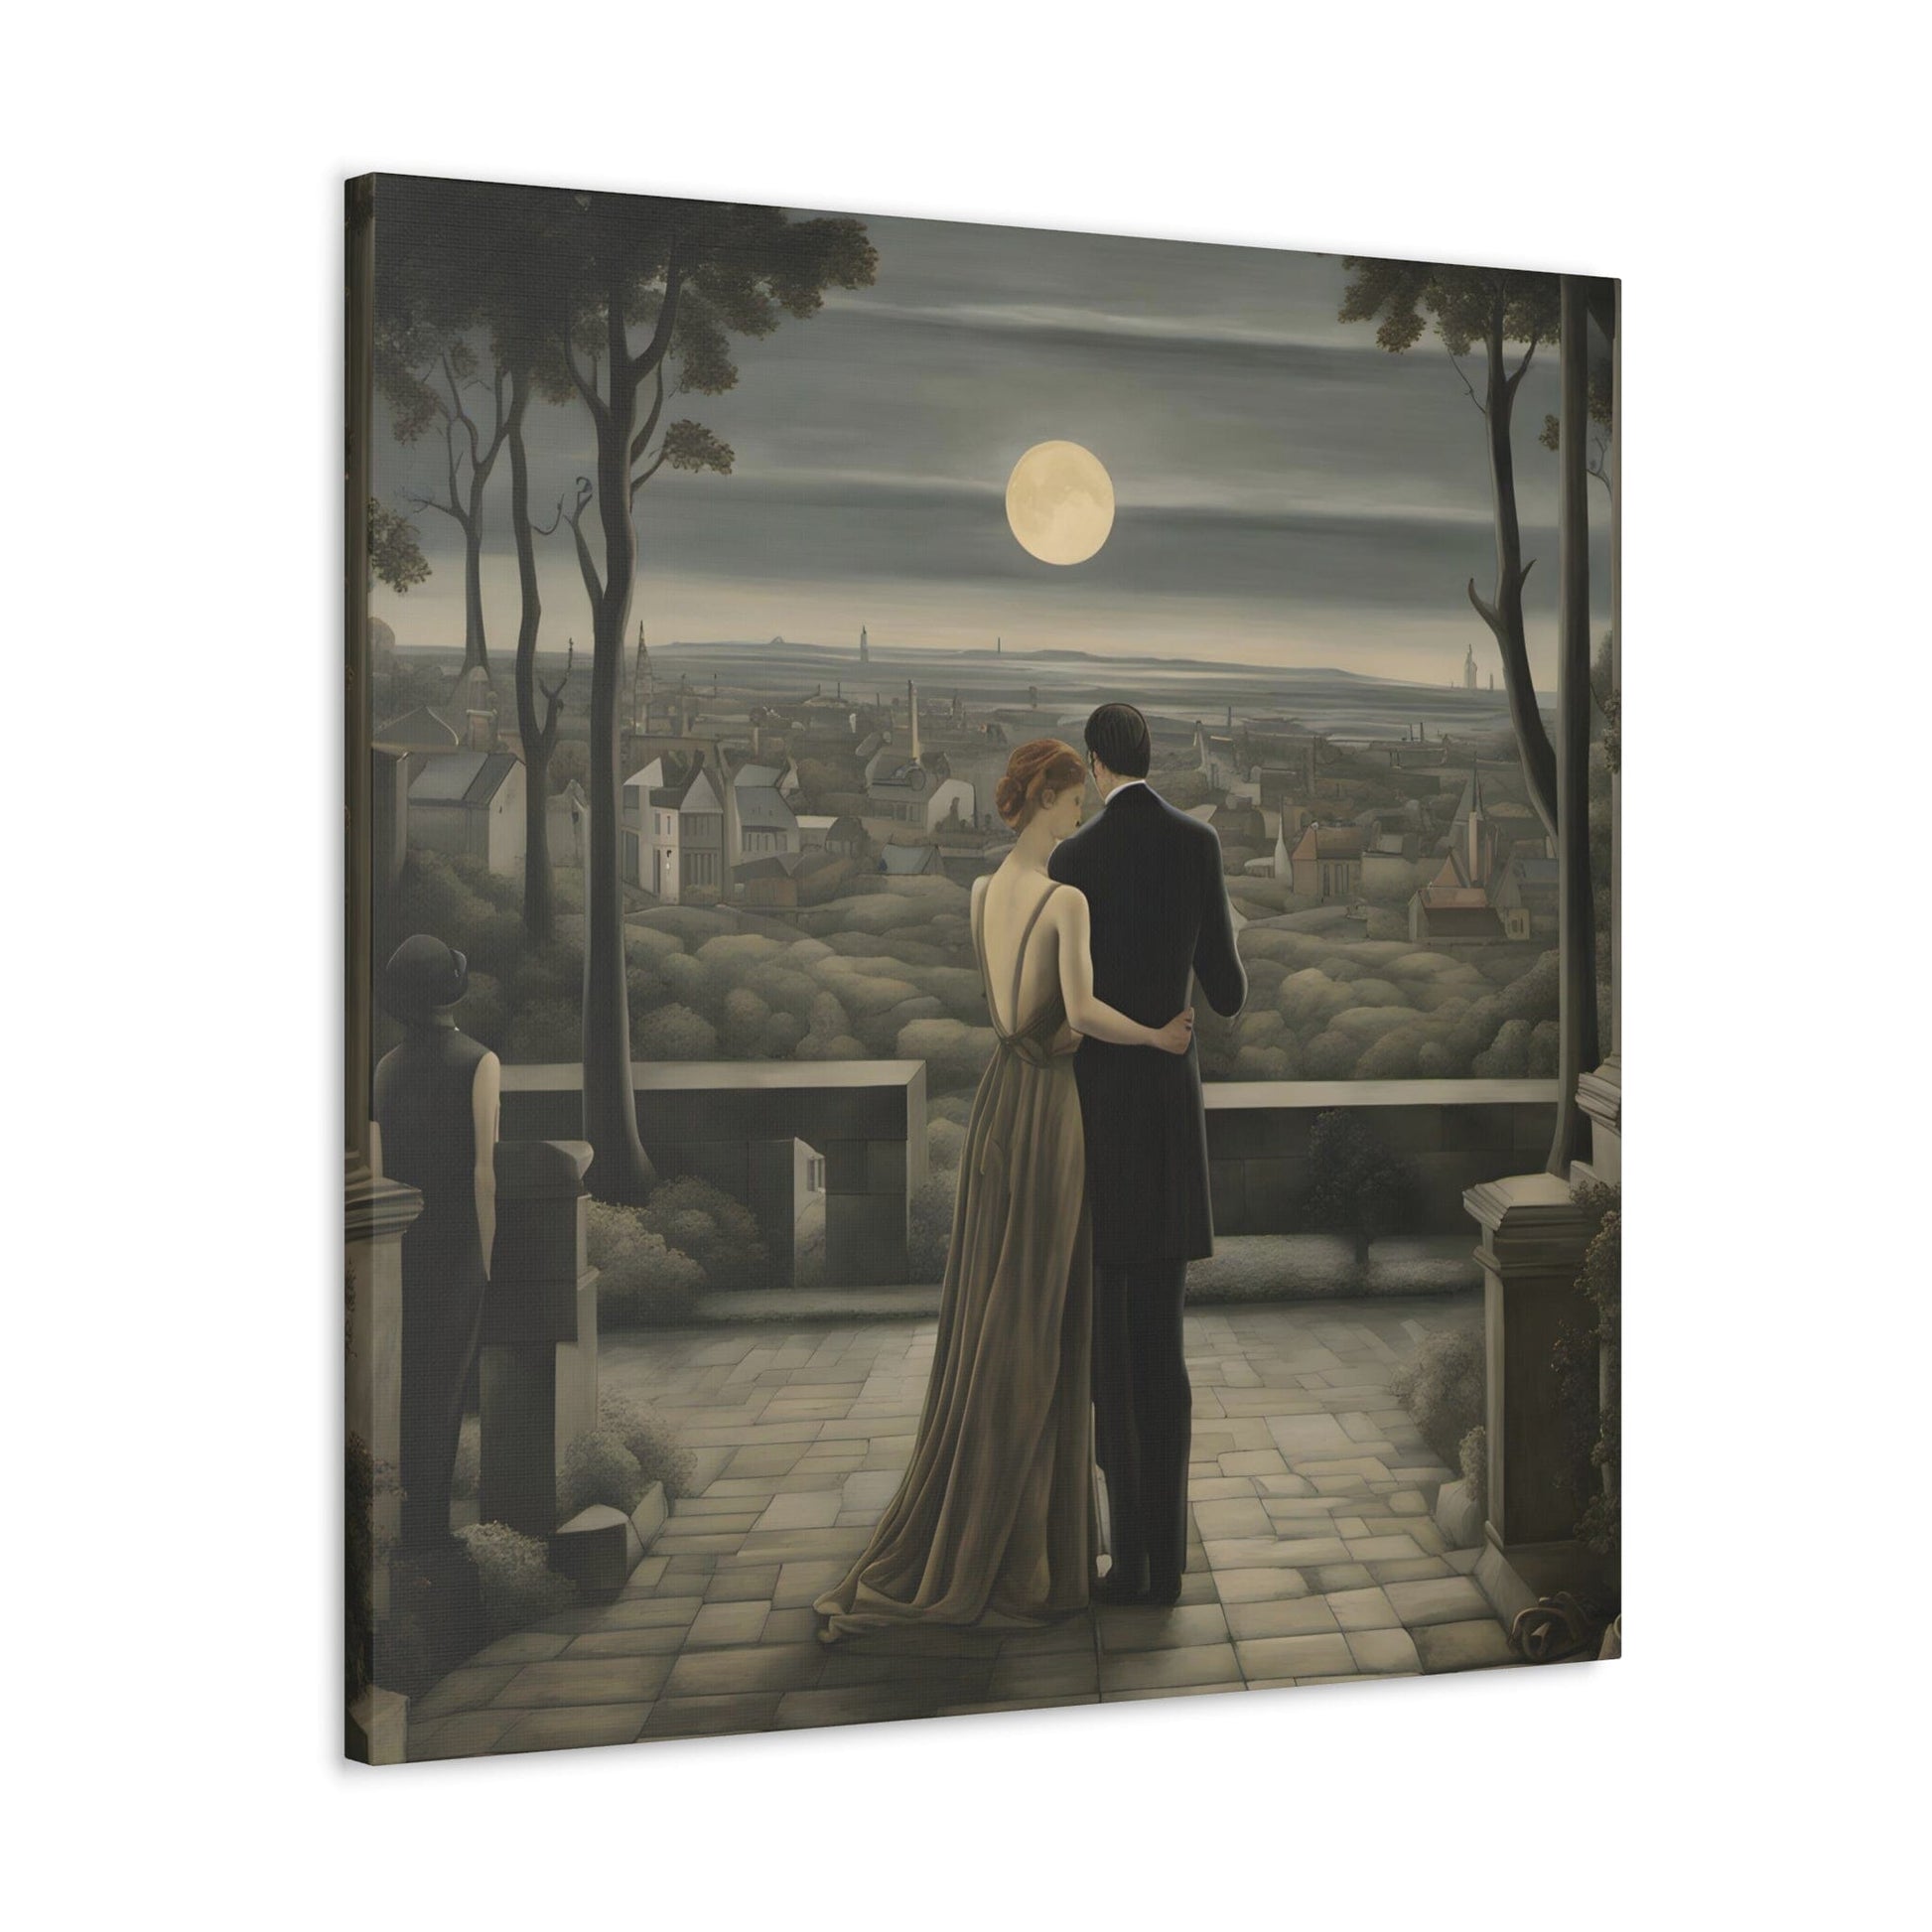 Leon Dufour. Whispers at Dusk. Exclusive Canvas Graphic Print